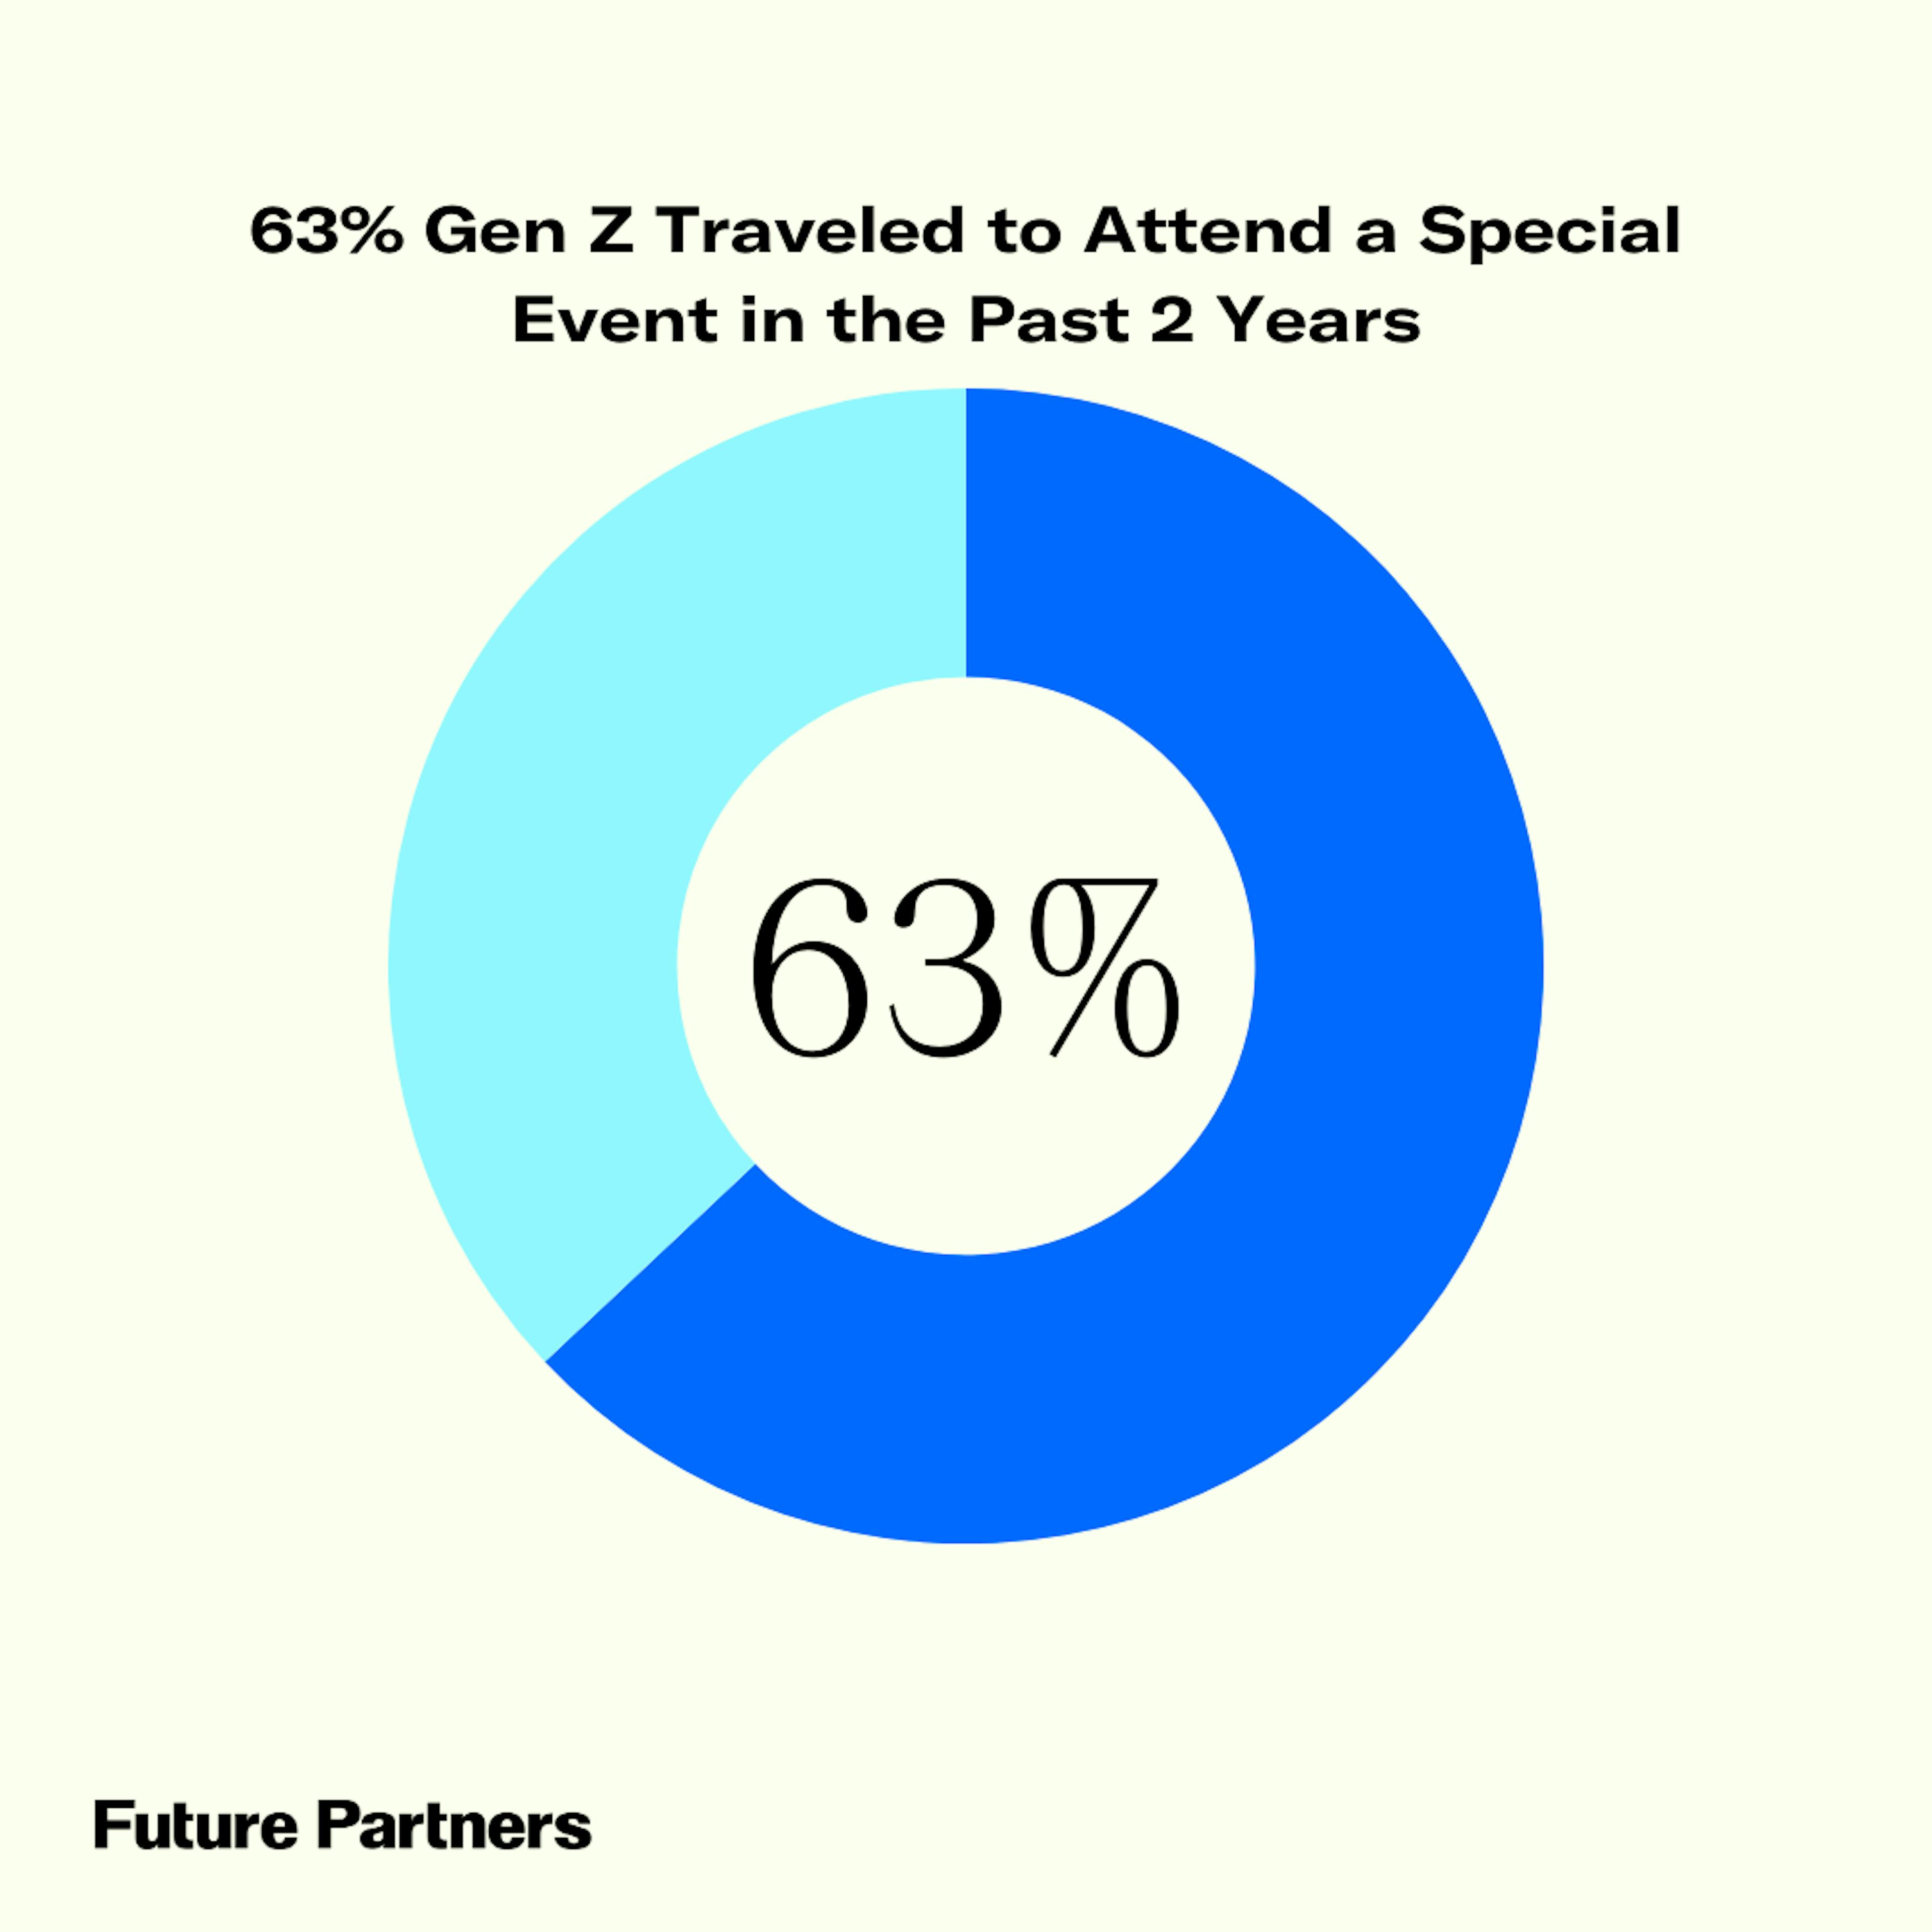 63% of Gen Z travelers indicate they have traveled to attend a special event in the past two years.